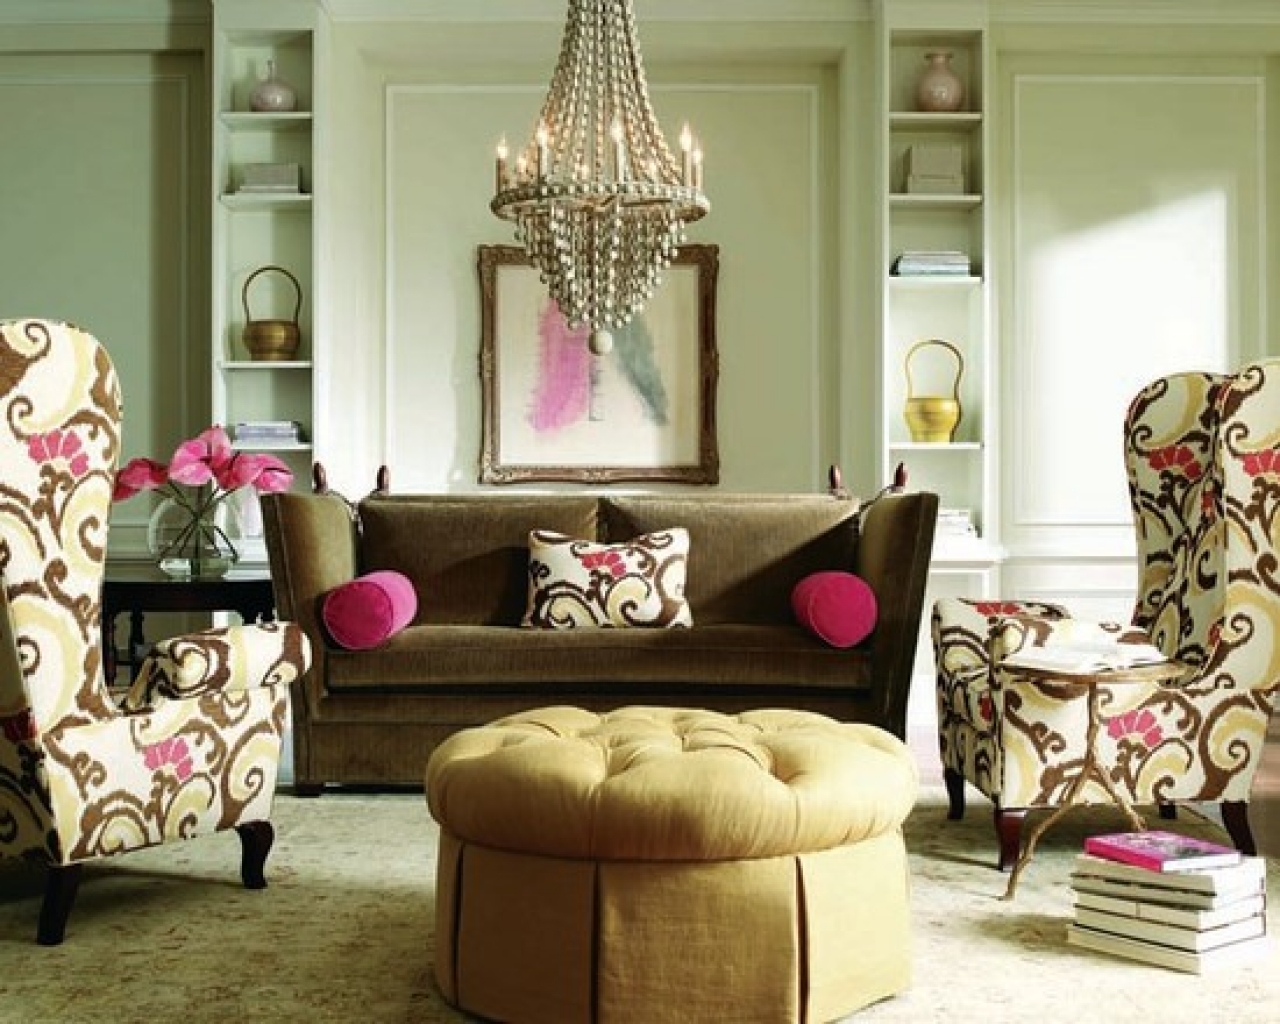 Eclectic Living Room Design Ideas for Captivating ...